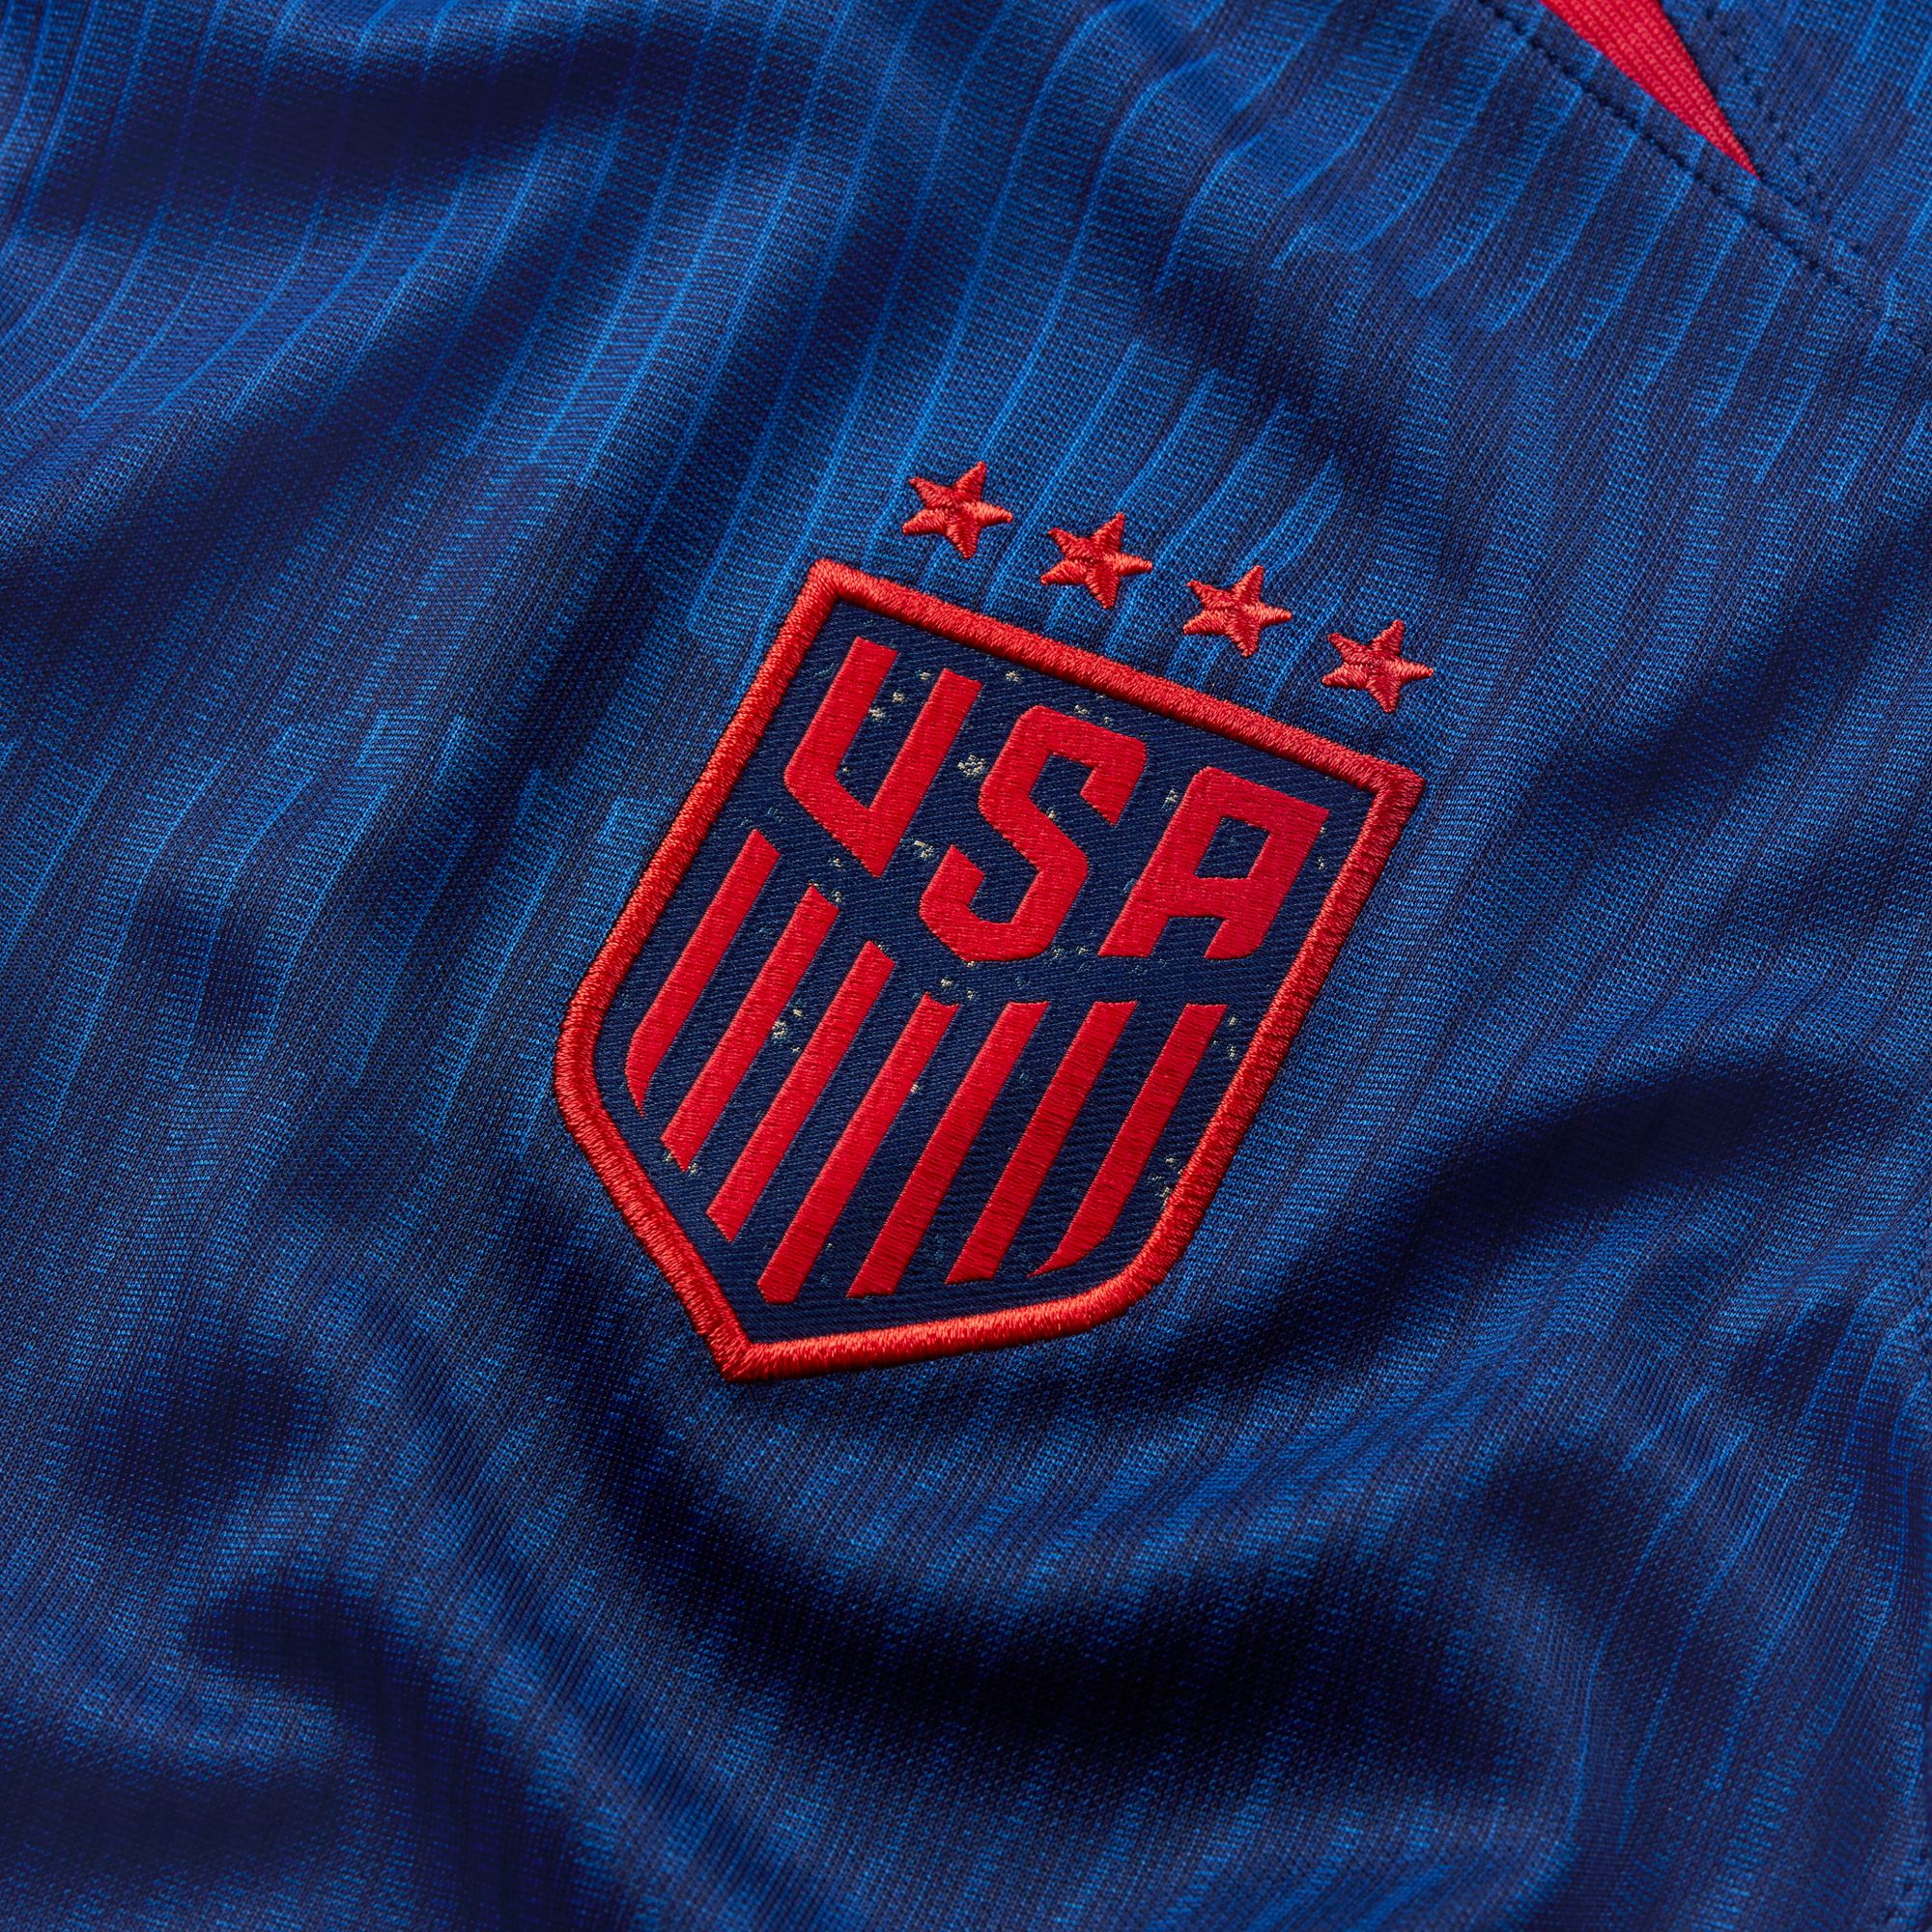 Show me the merch: what's going on with the USWNT's World Cup jersey sales?  - Stars and Stripes FC